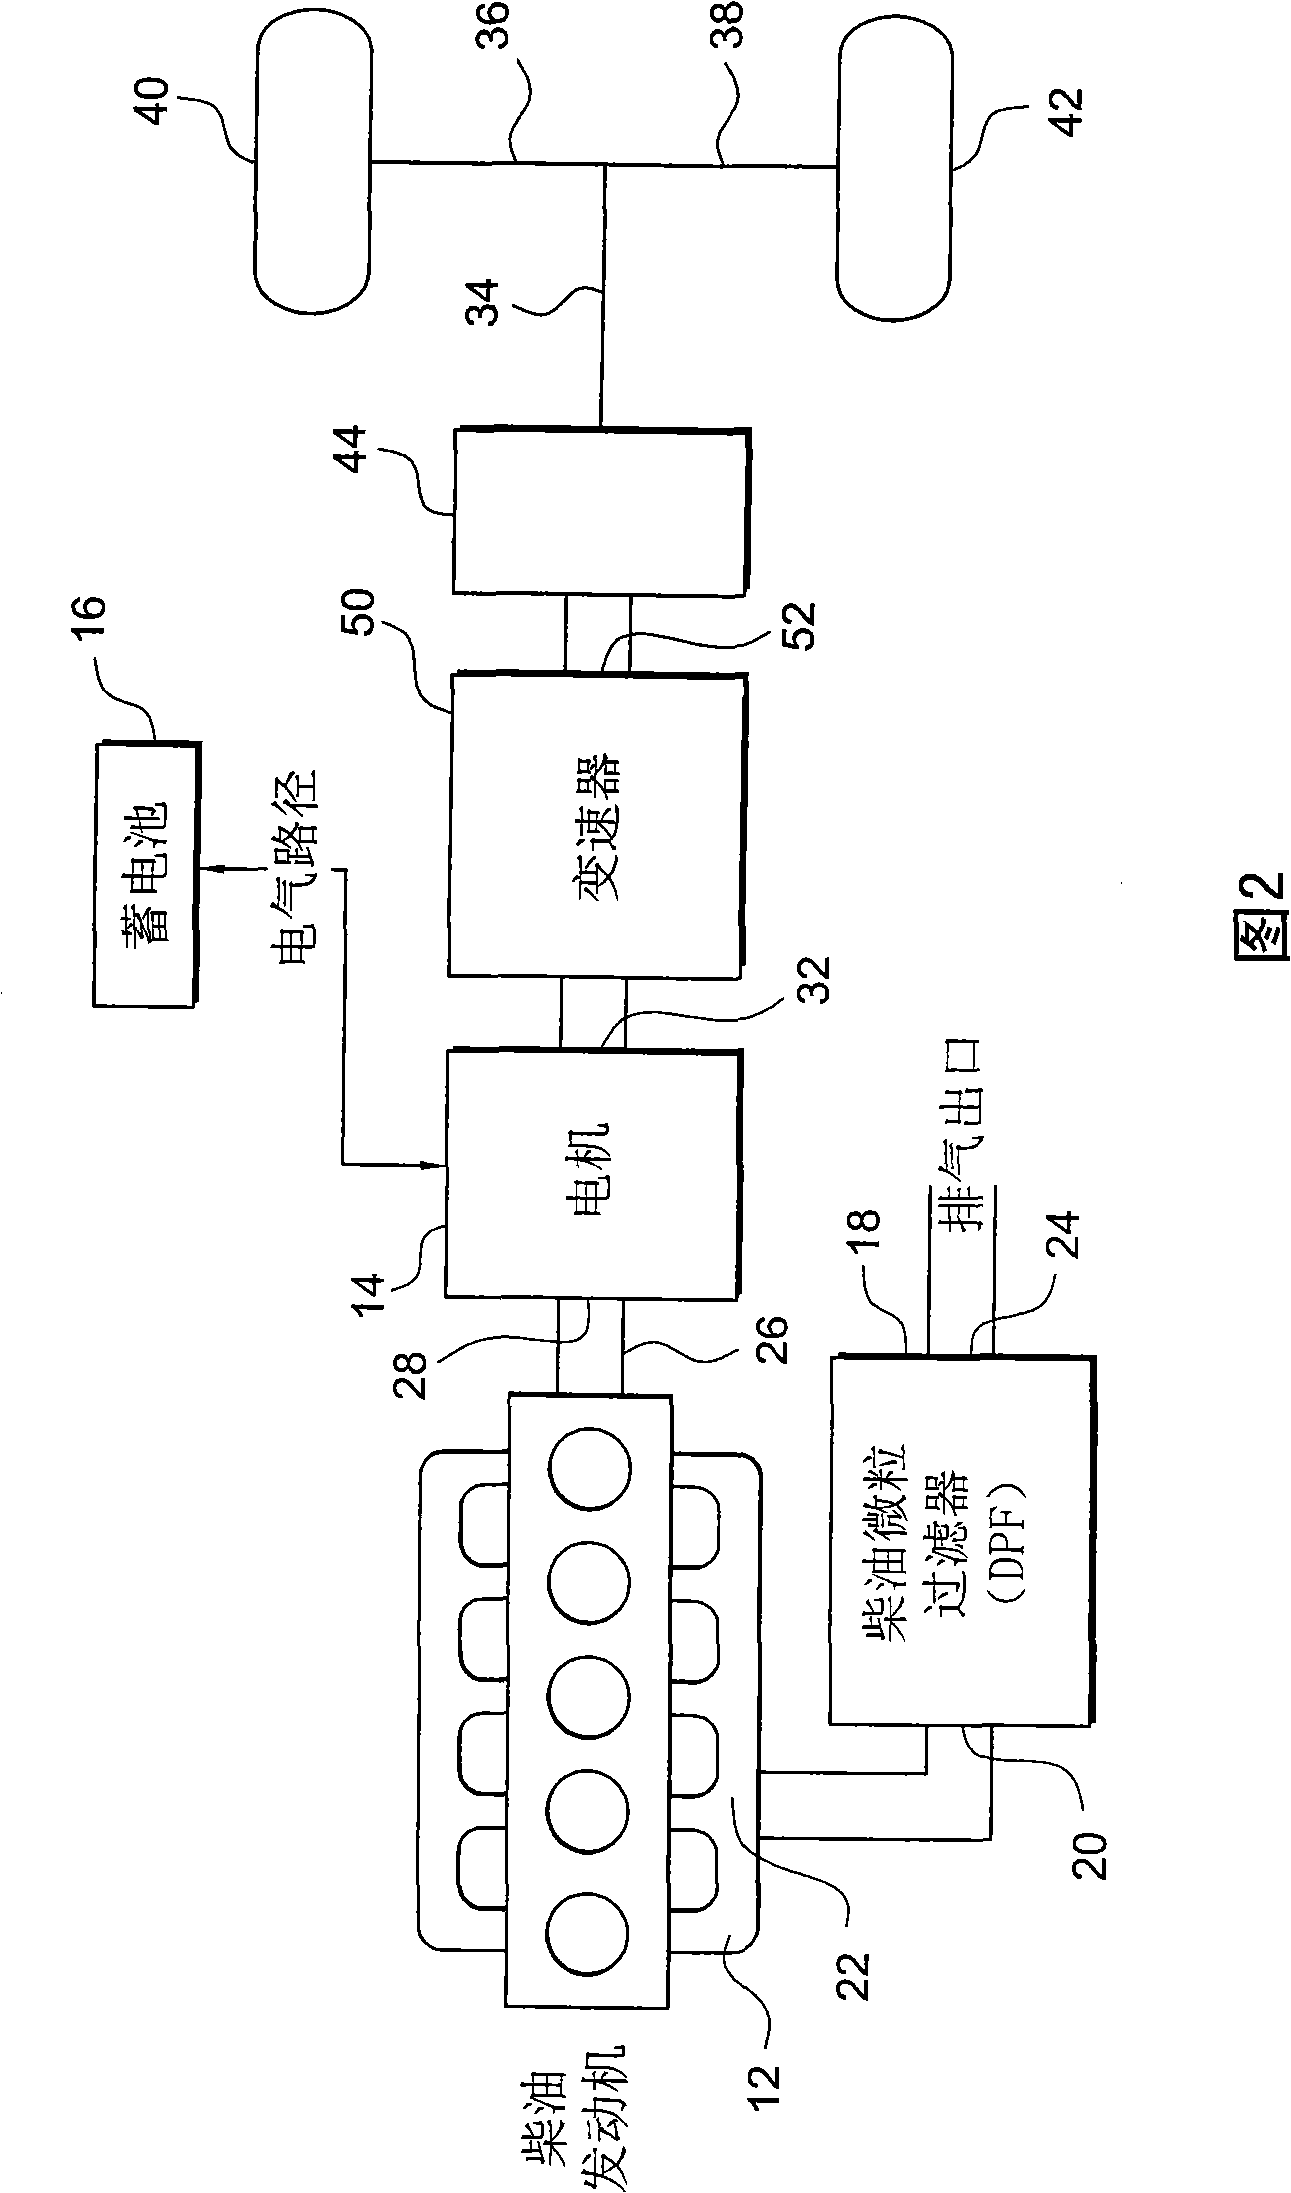 Regenerating an engine exhaust gas particulate filter for hybrid electric vehicle